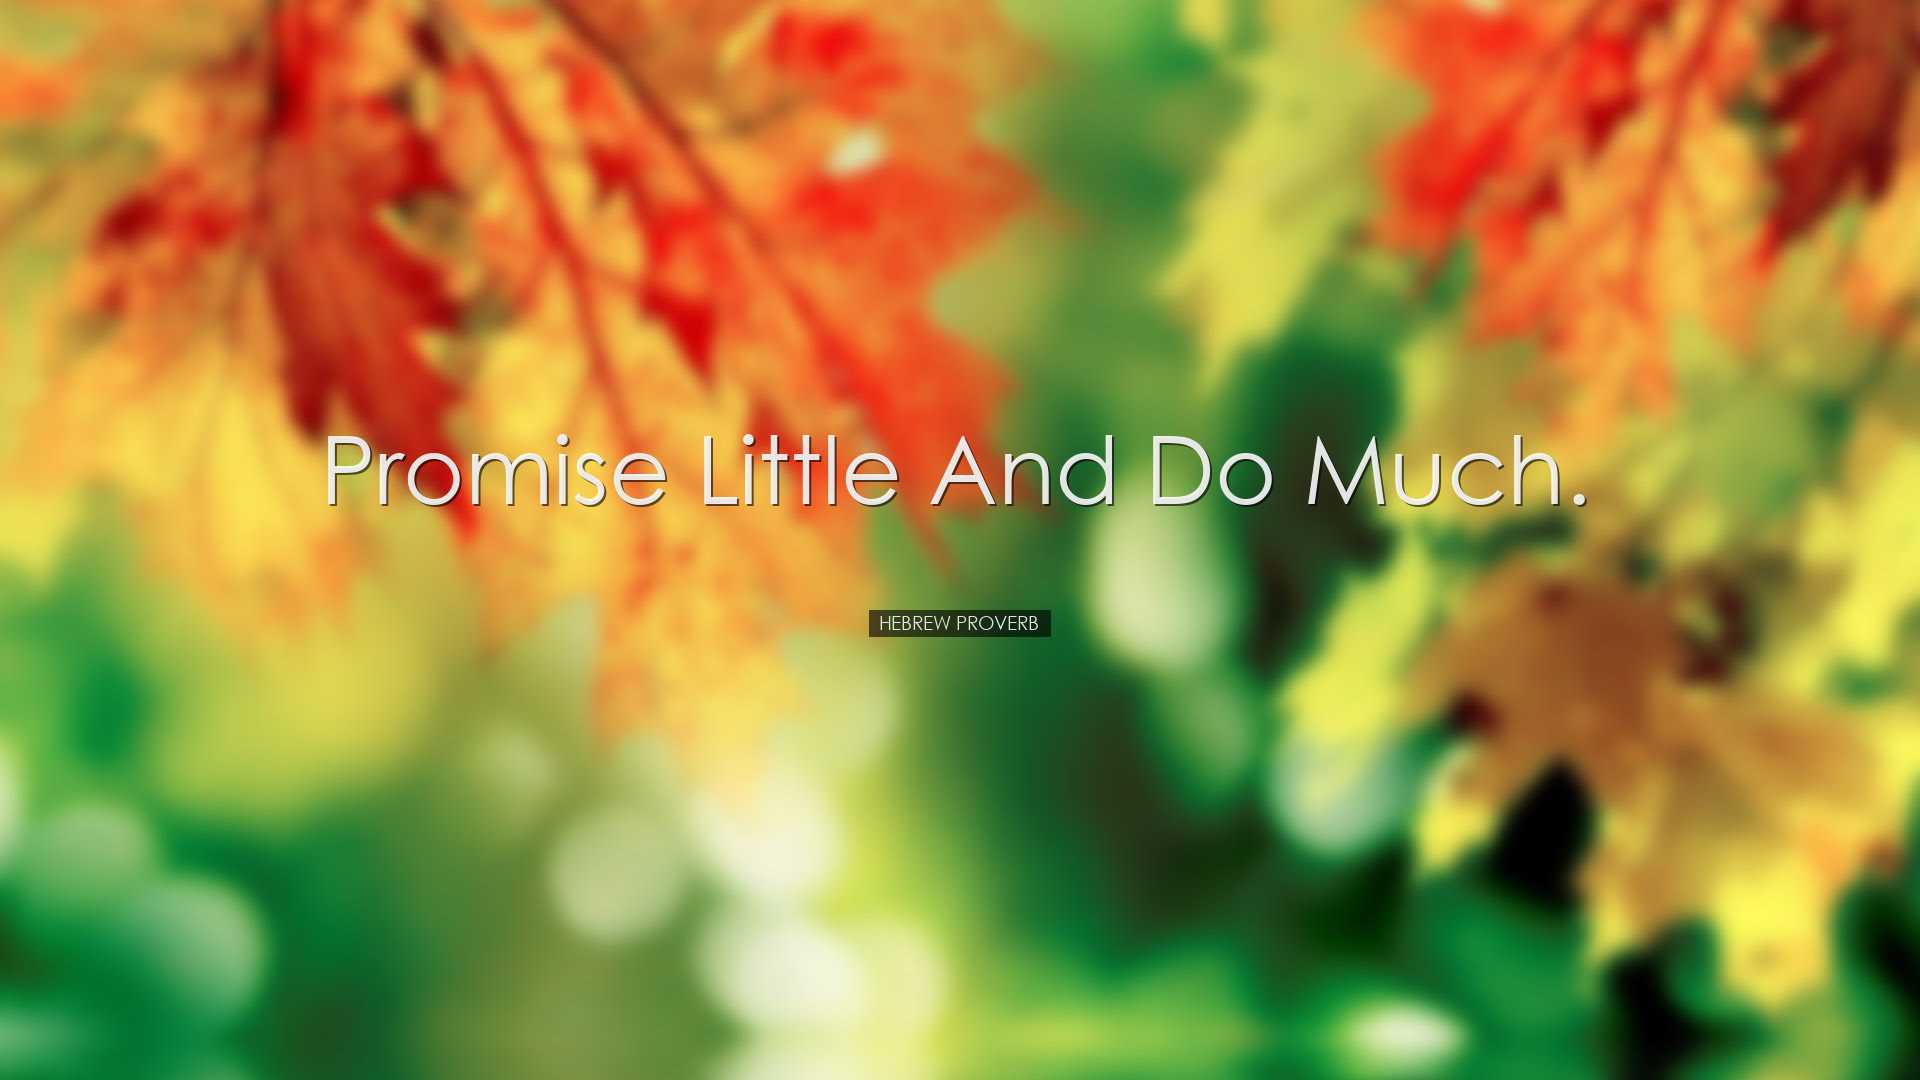 Promise little and do much. - Hebrew Proverb